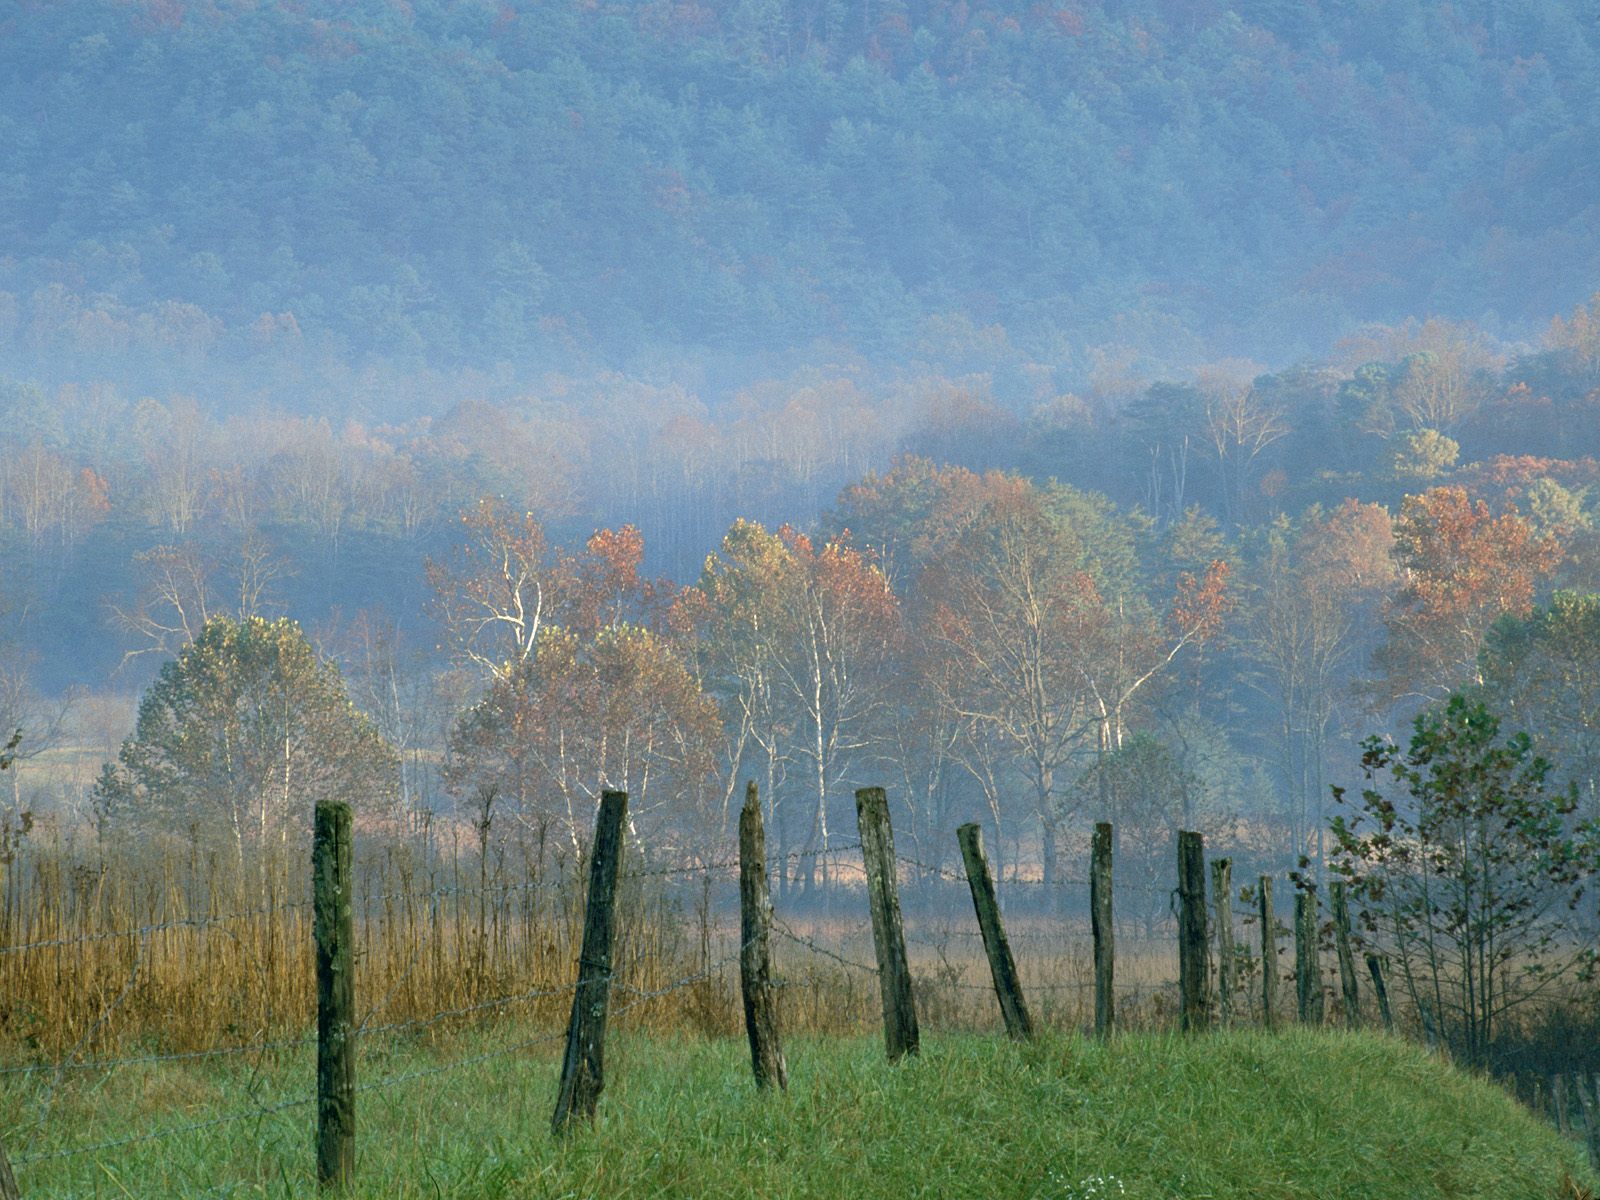 Cades Cove, Great Smoky Mountains National Park - HD Wallpaper 